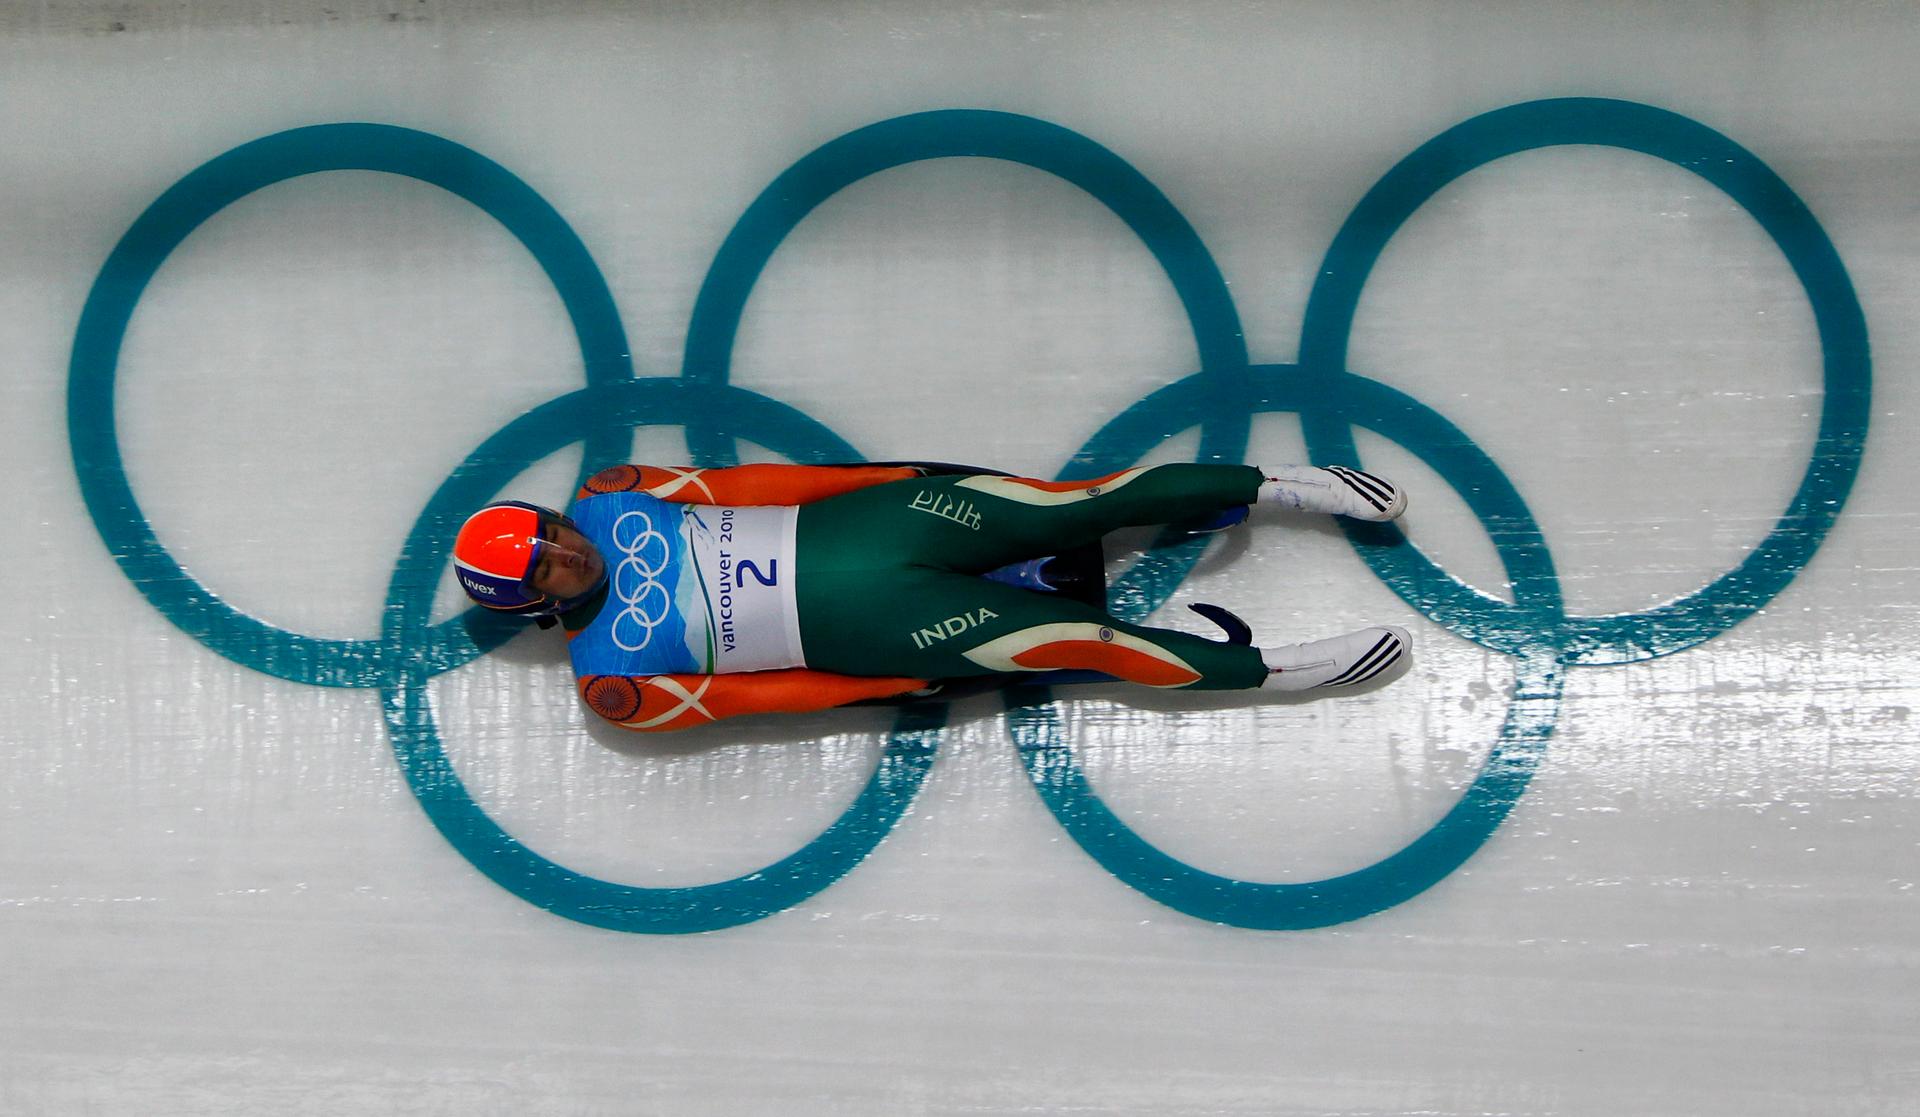 India's Shiva K.P. Keshavan speeds down the track during a training run for the men's singles luge in preparation for the Vancouver 2010 Winter Olympics in Whistler, British Columbia. Keshavan will be at Sochi, along with two other athletes from India, bu